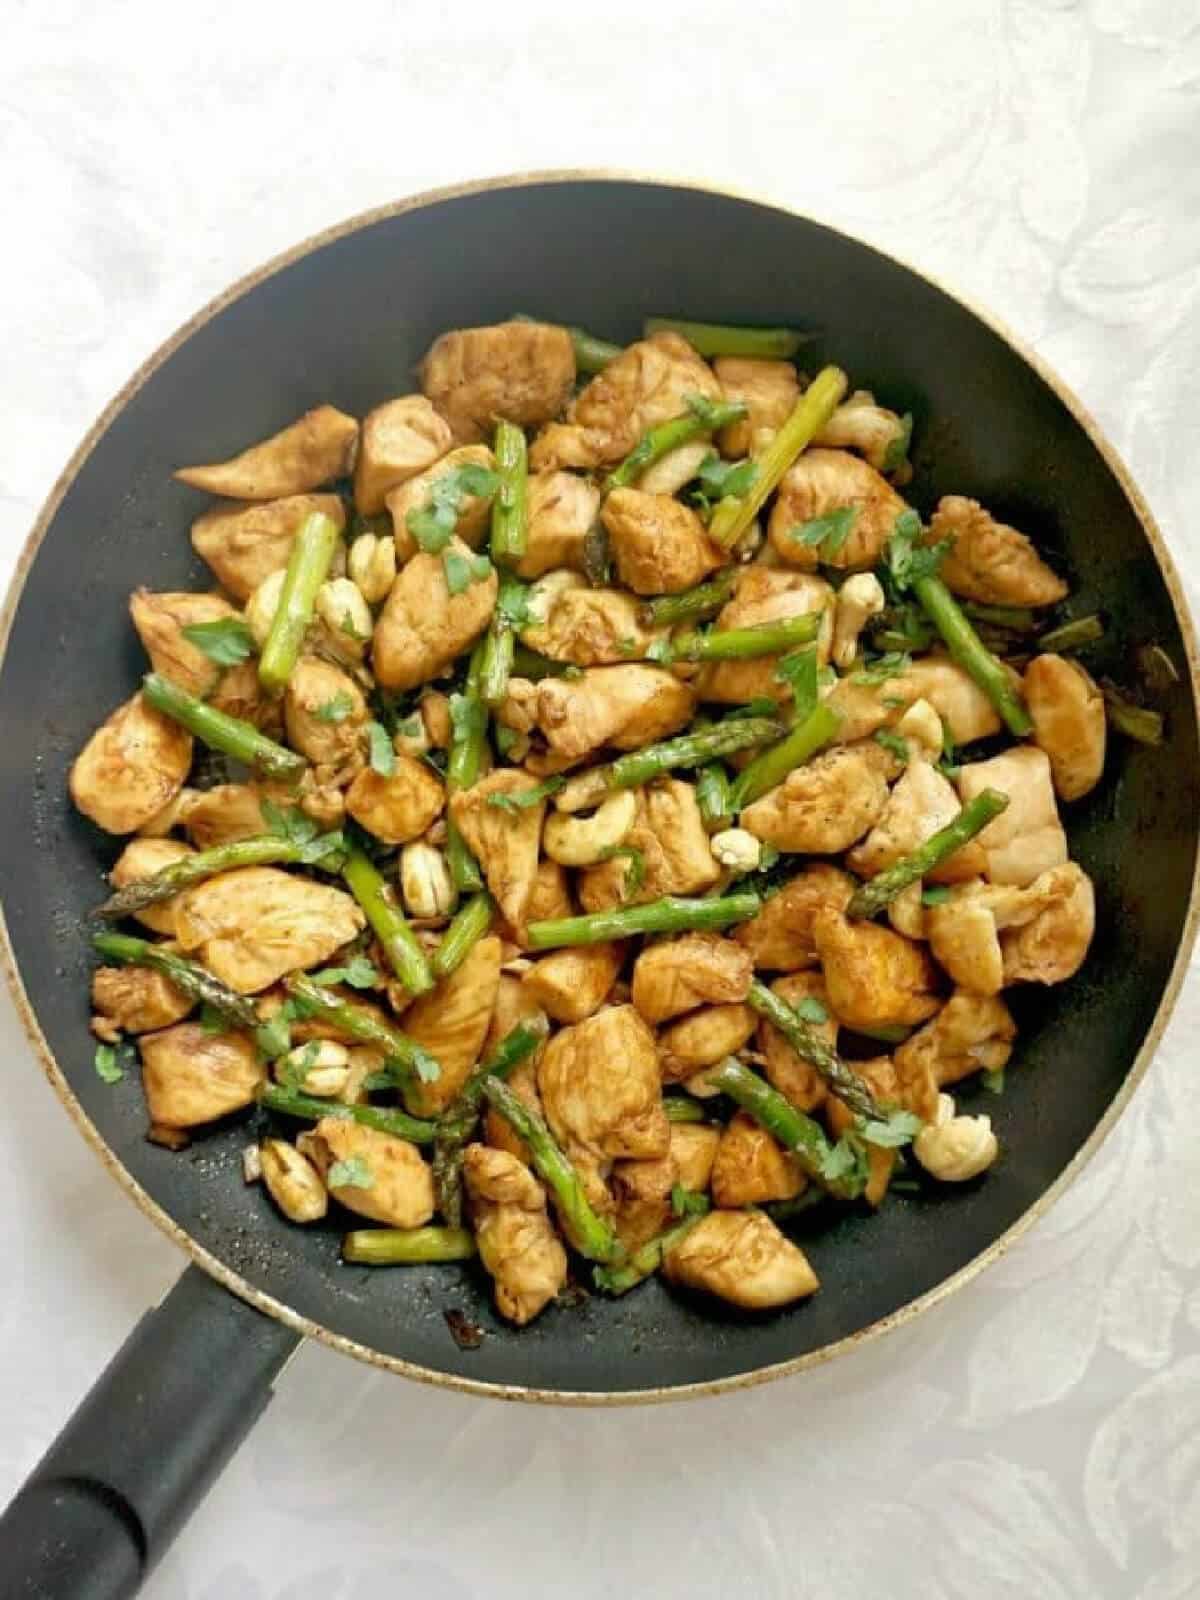 Overhead shoot of a pan with chicken and asparagus stir fry.